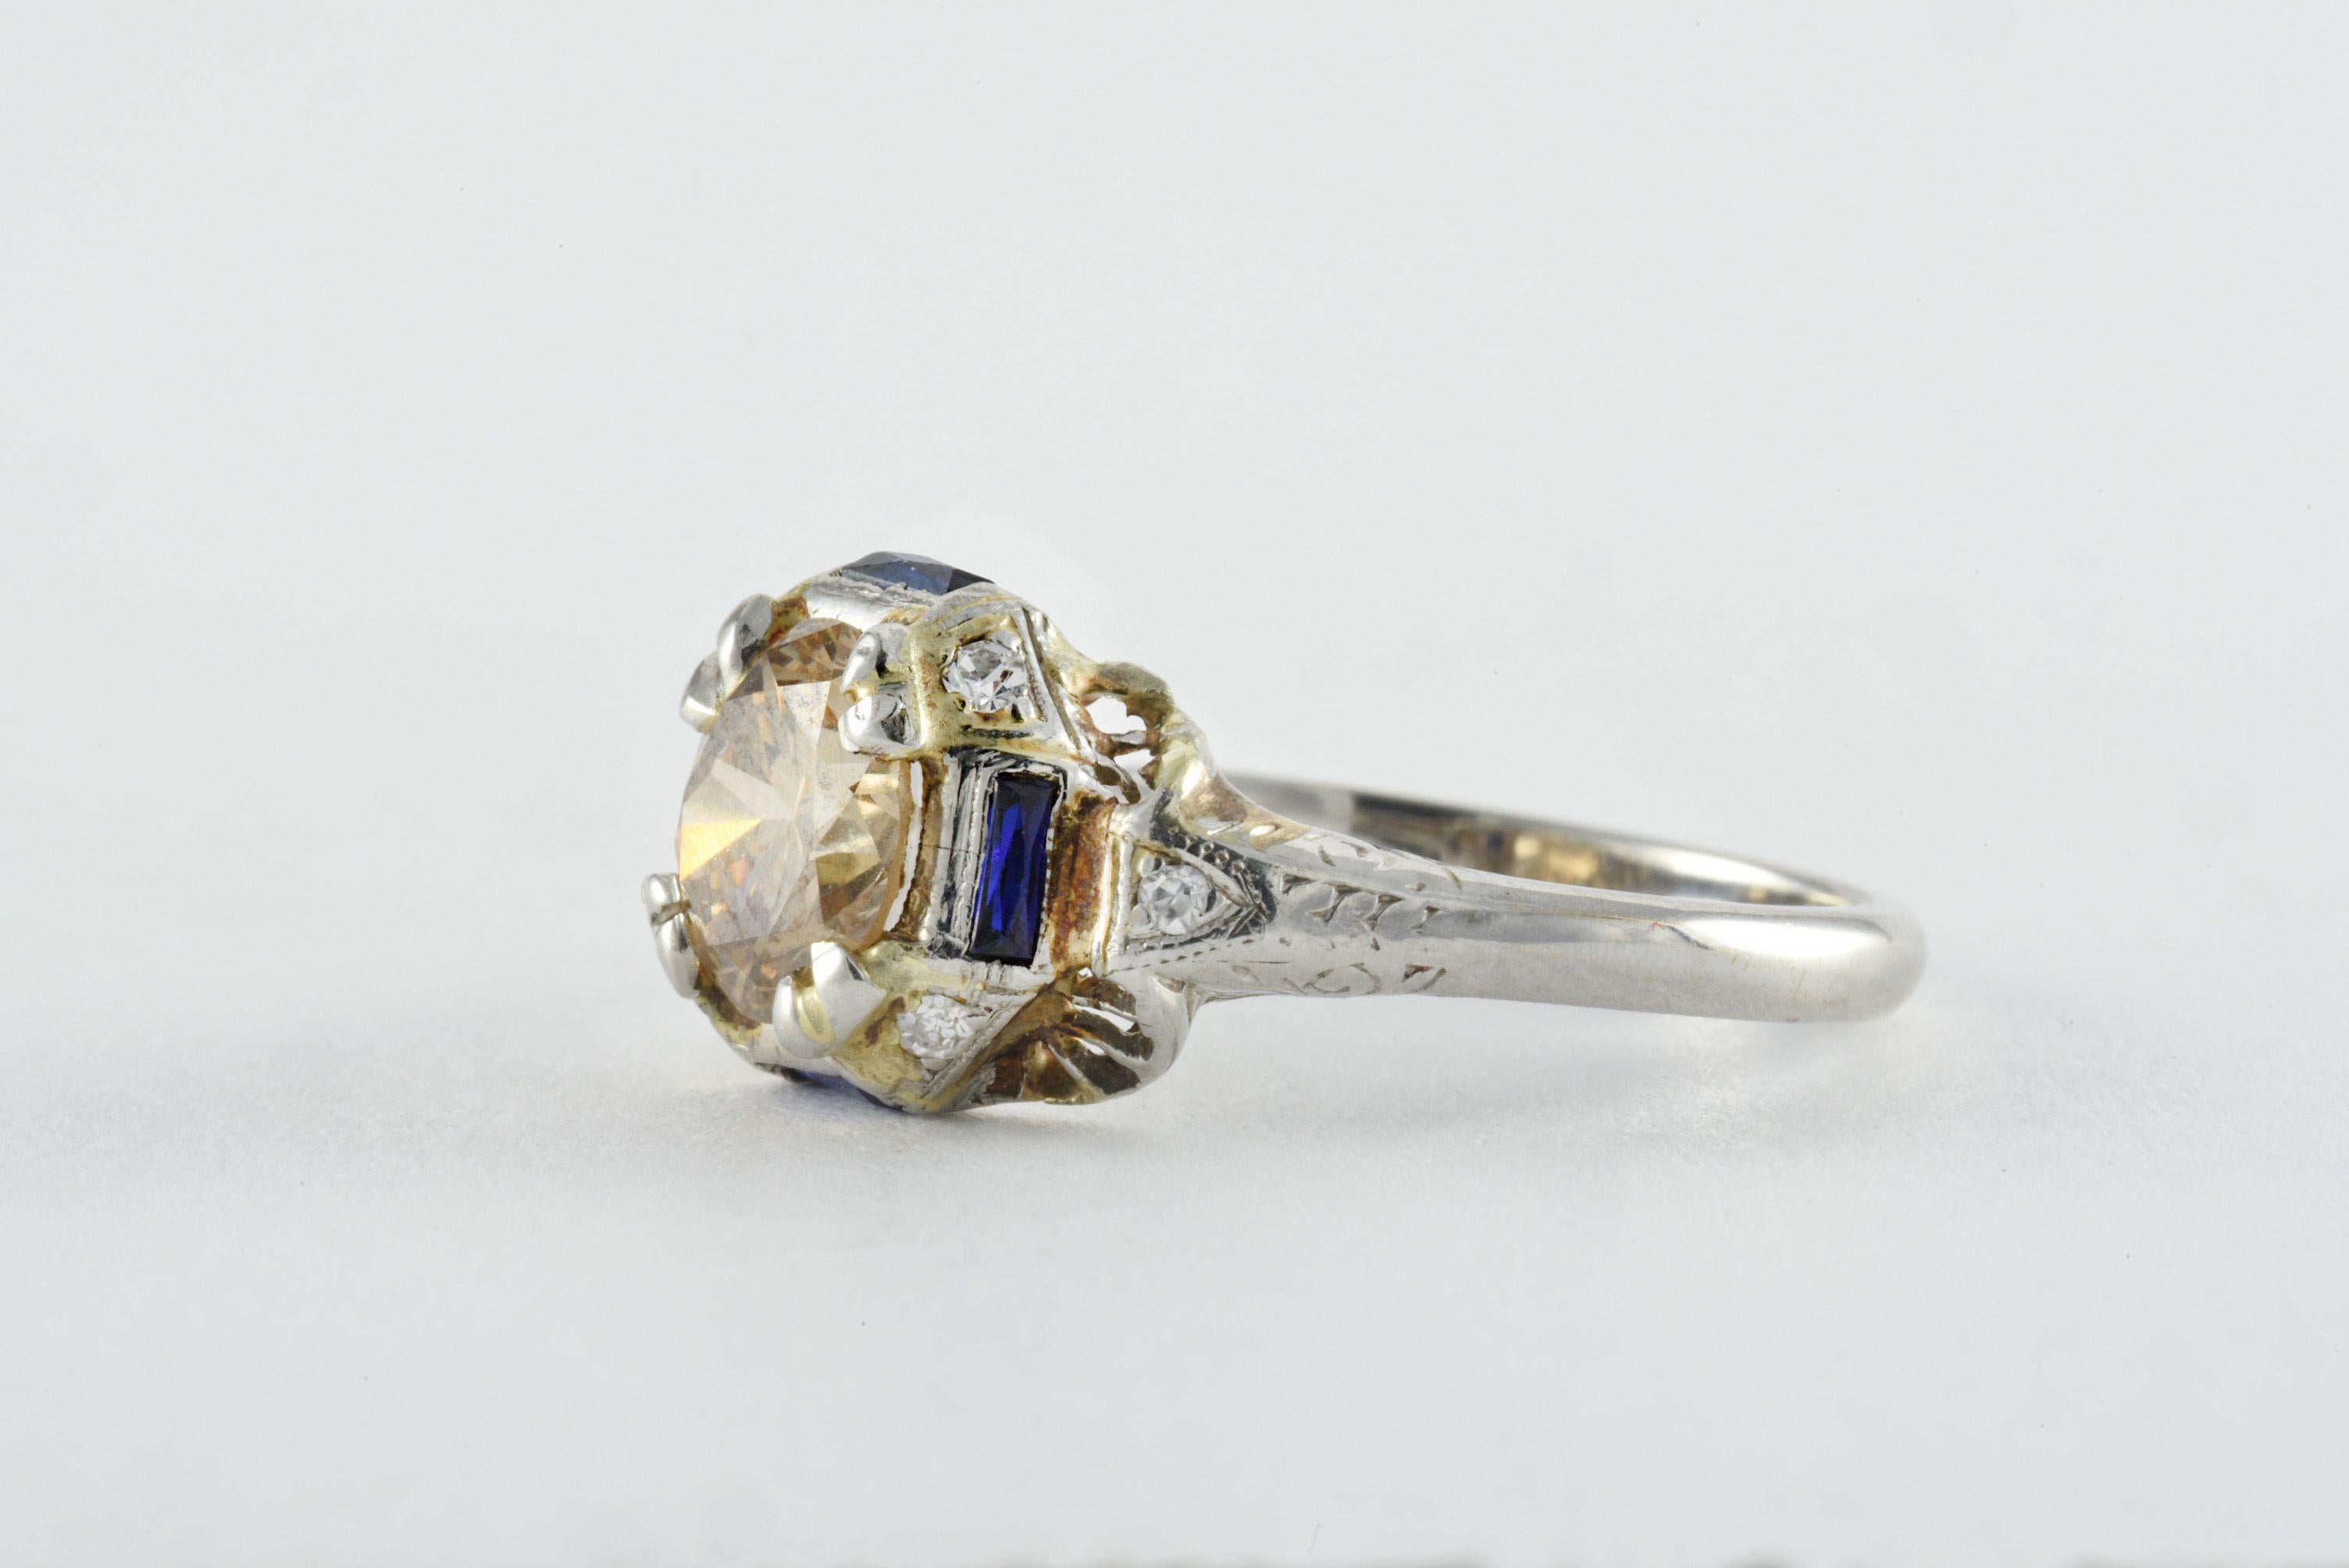 Crafted in the 1920s from 14kt white gold, this Art Deco band is designed around a bold Old European cut champagne colored diamond measuring approximately 1.34 carats accented by four baguette-cut blue sapphires, four single cut diamonds, and